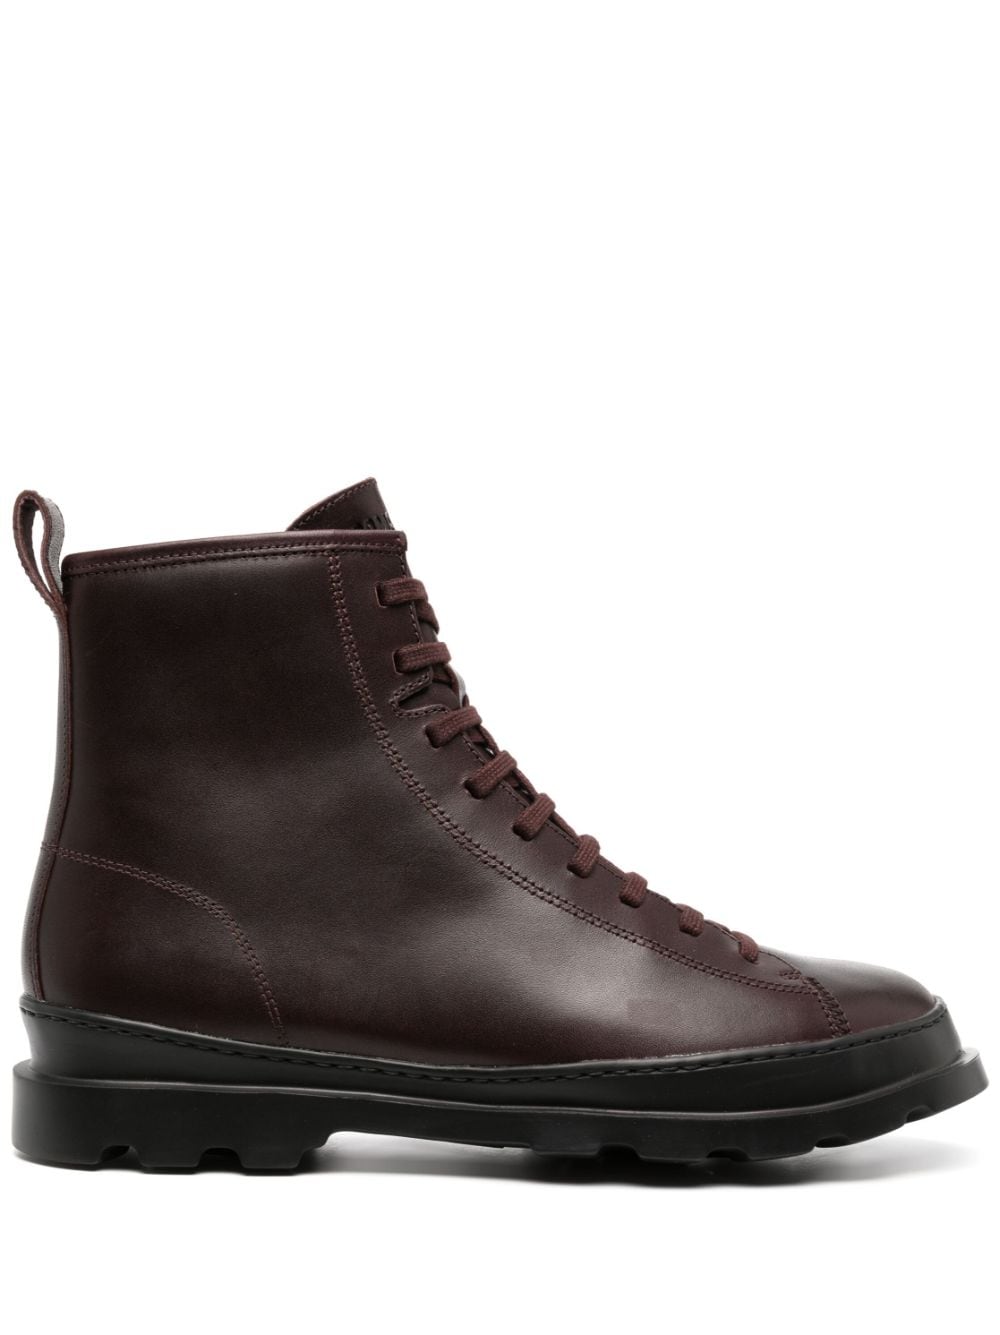 Image 1 of Camper Brutus leather ankle boots